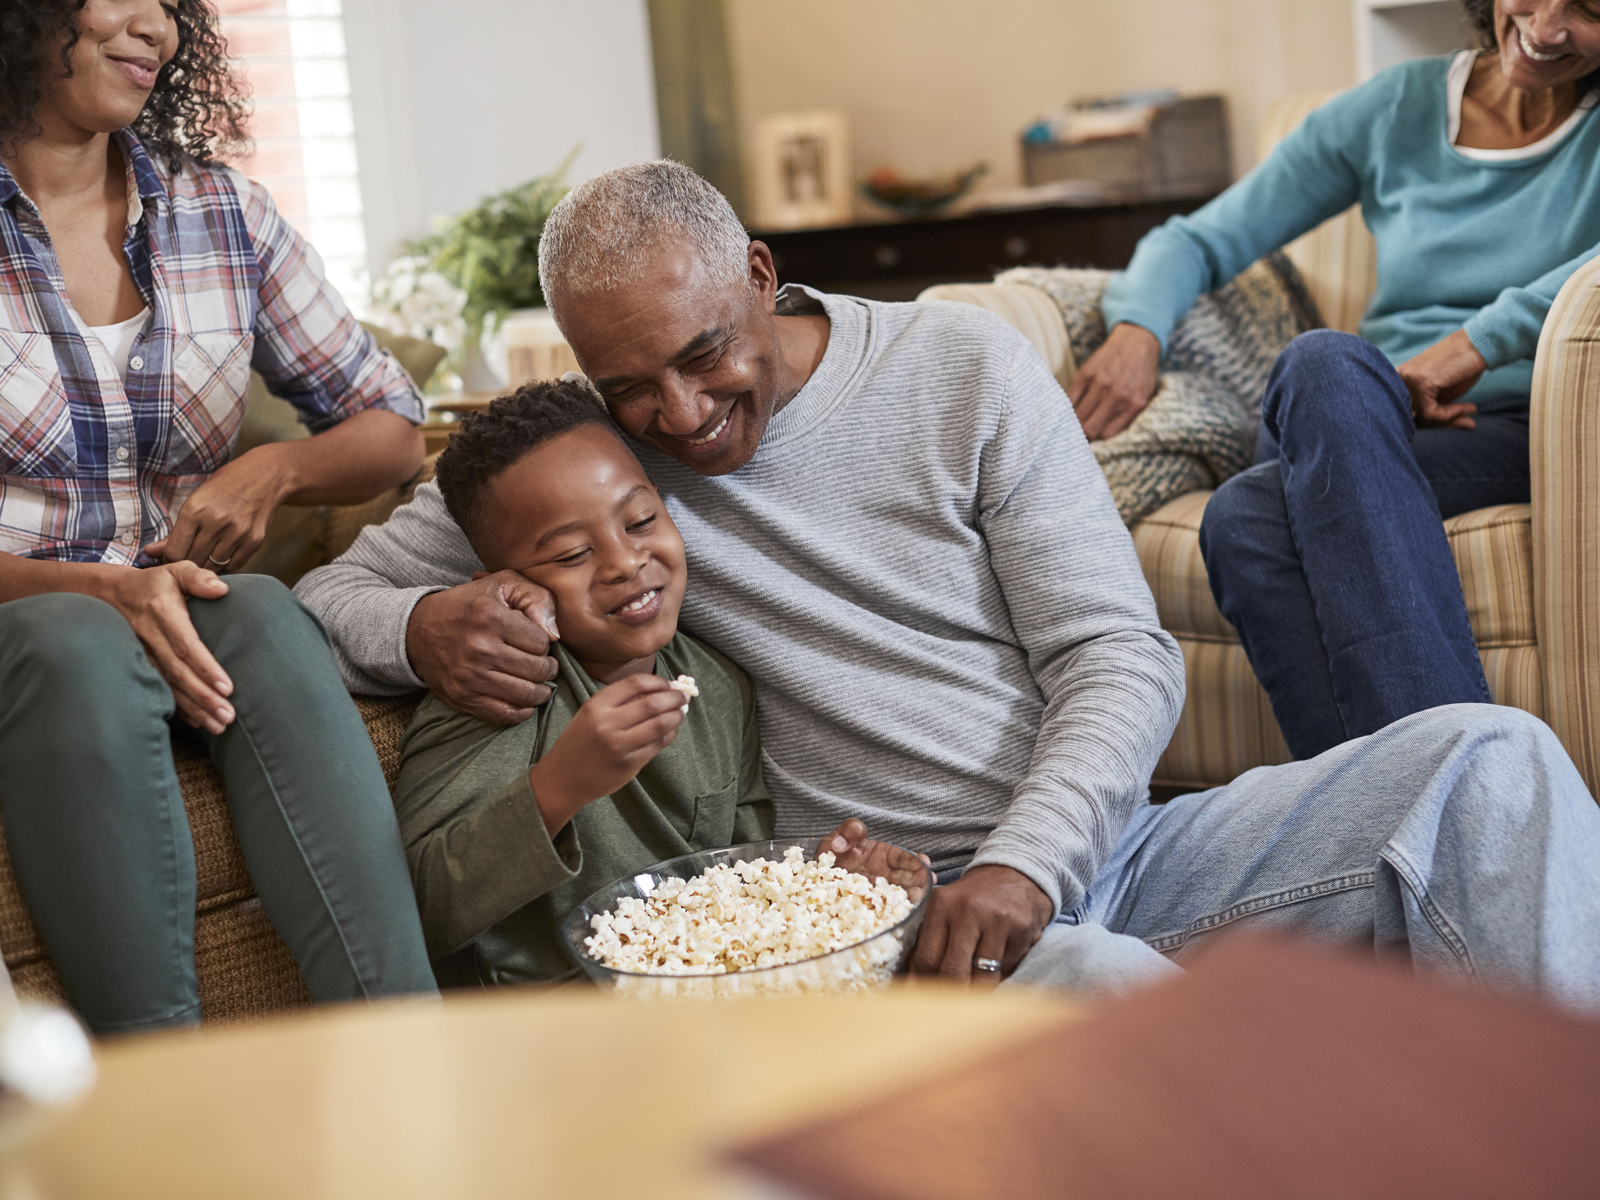 A family enjoys eating popcorn and spending time together in the living room.